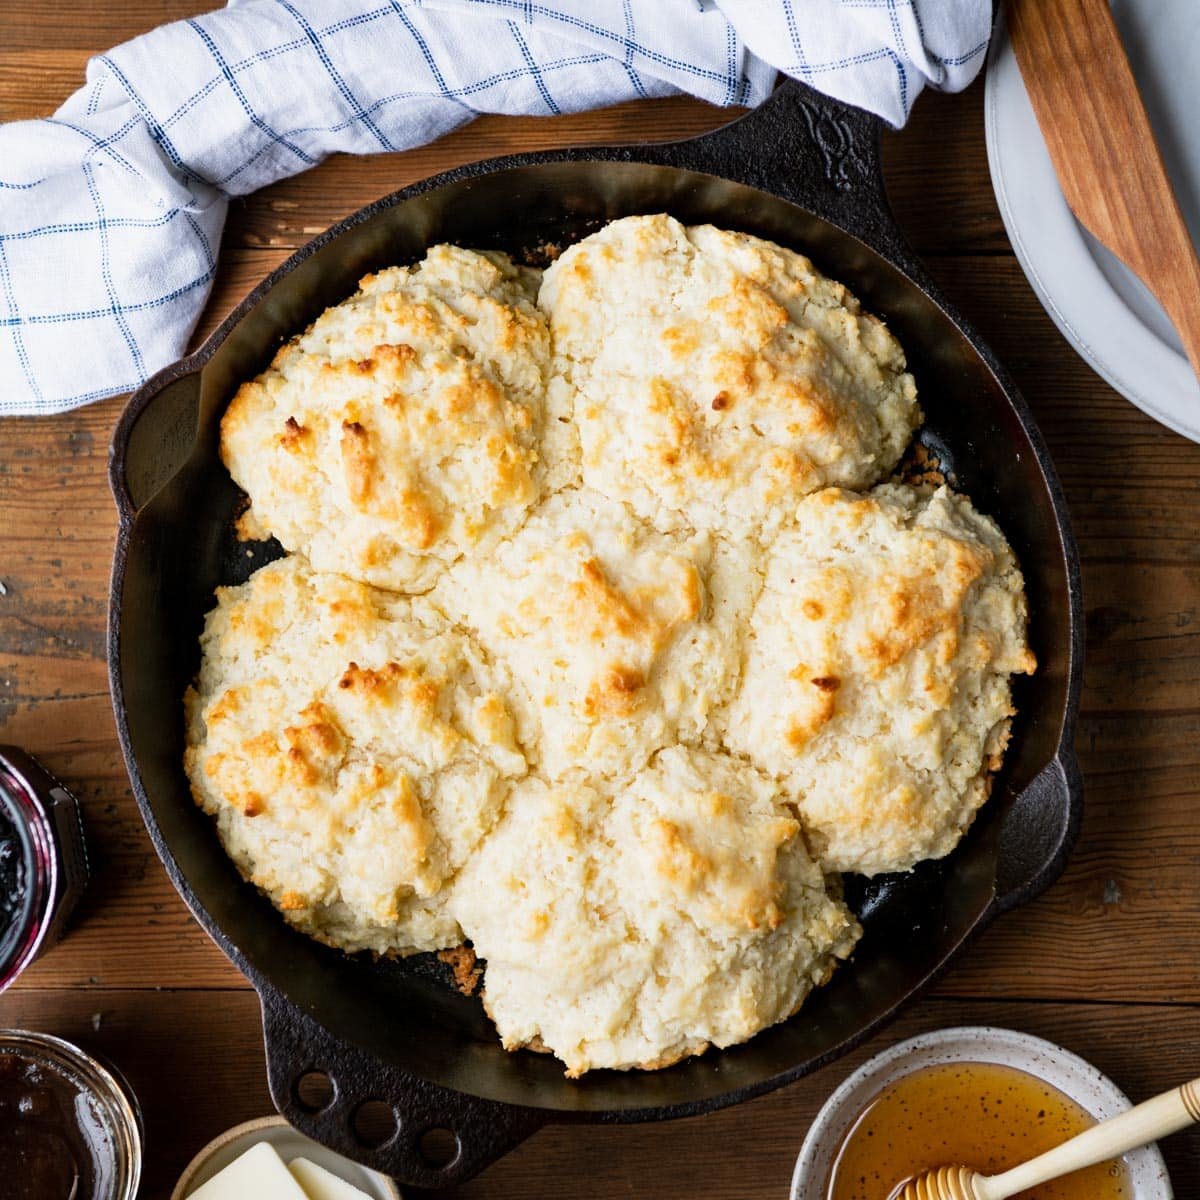 The Most Comforting Southern Style Skillet Biscuits